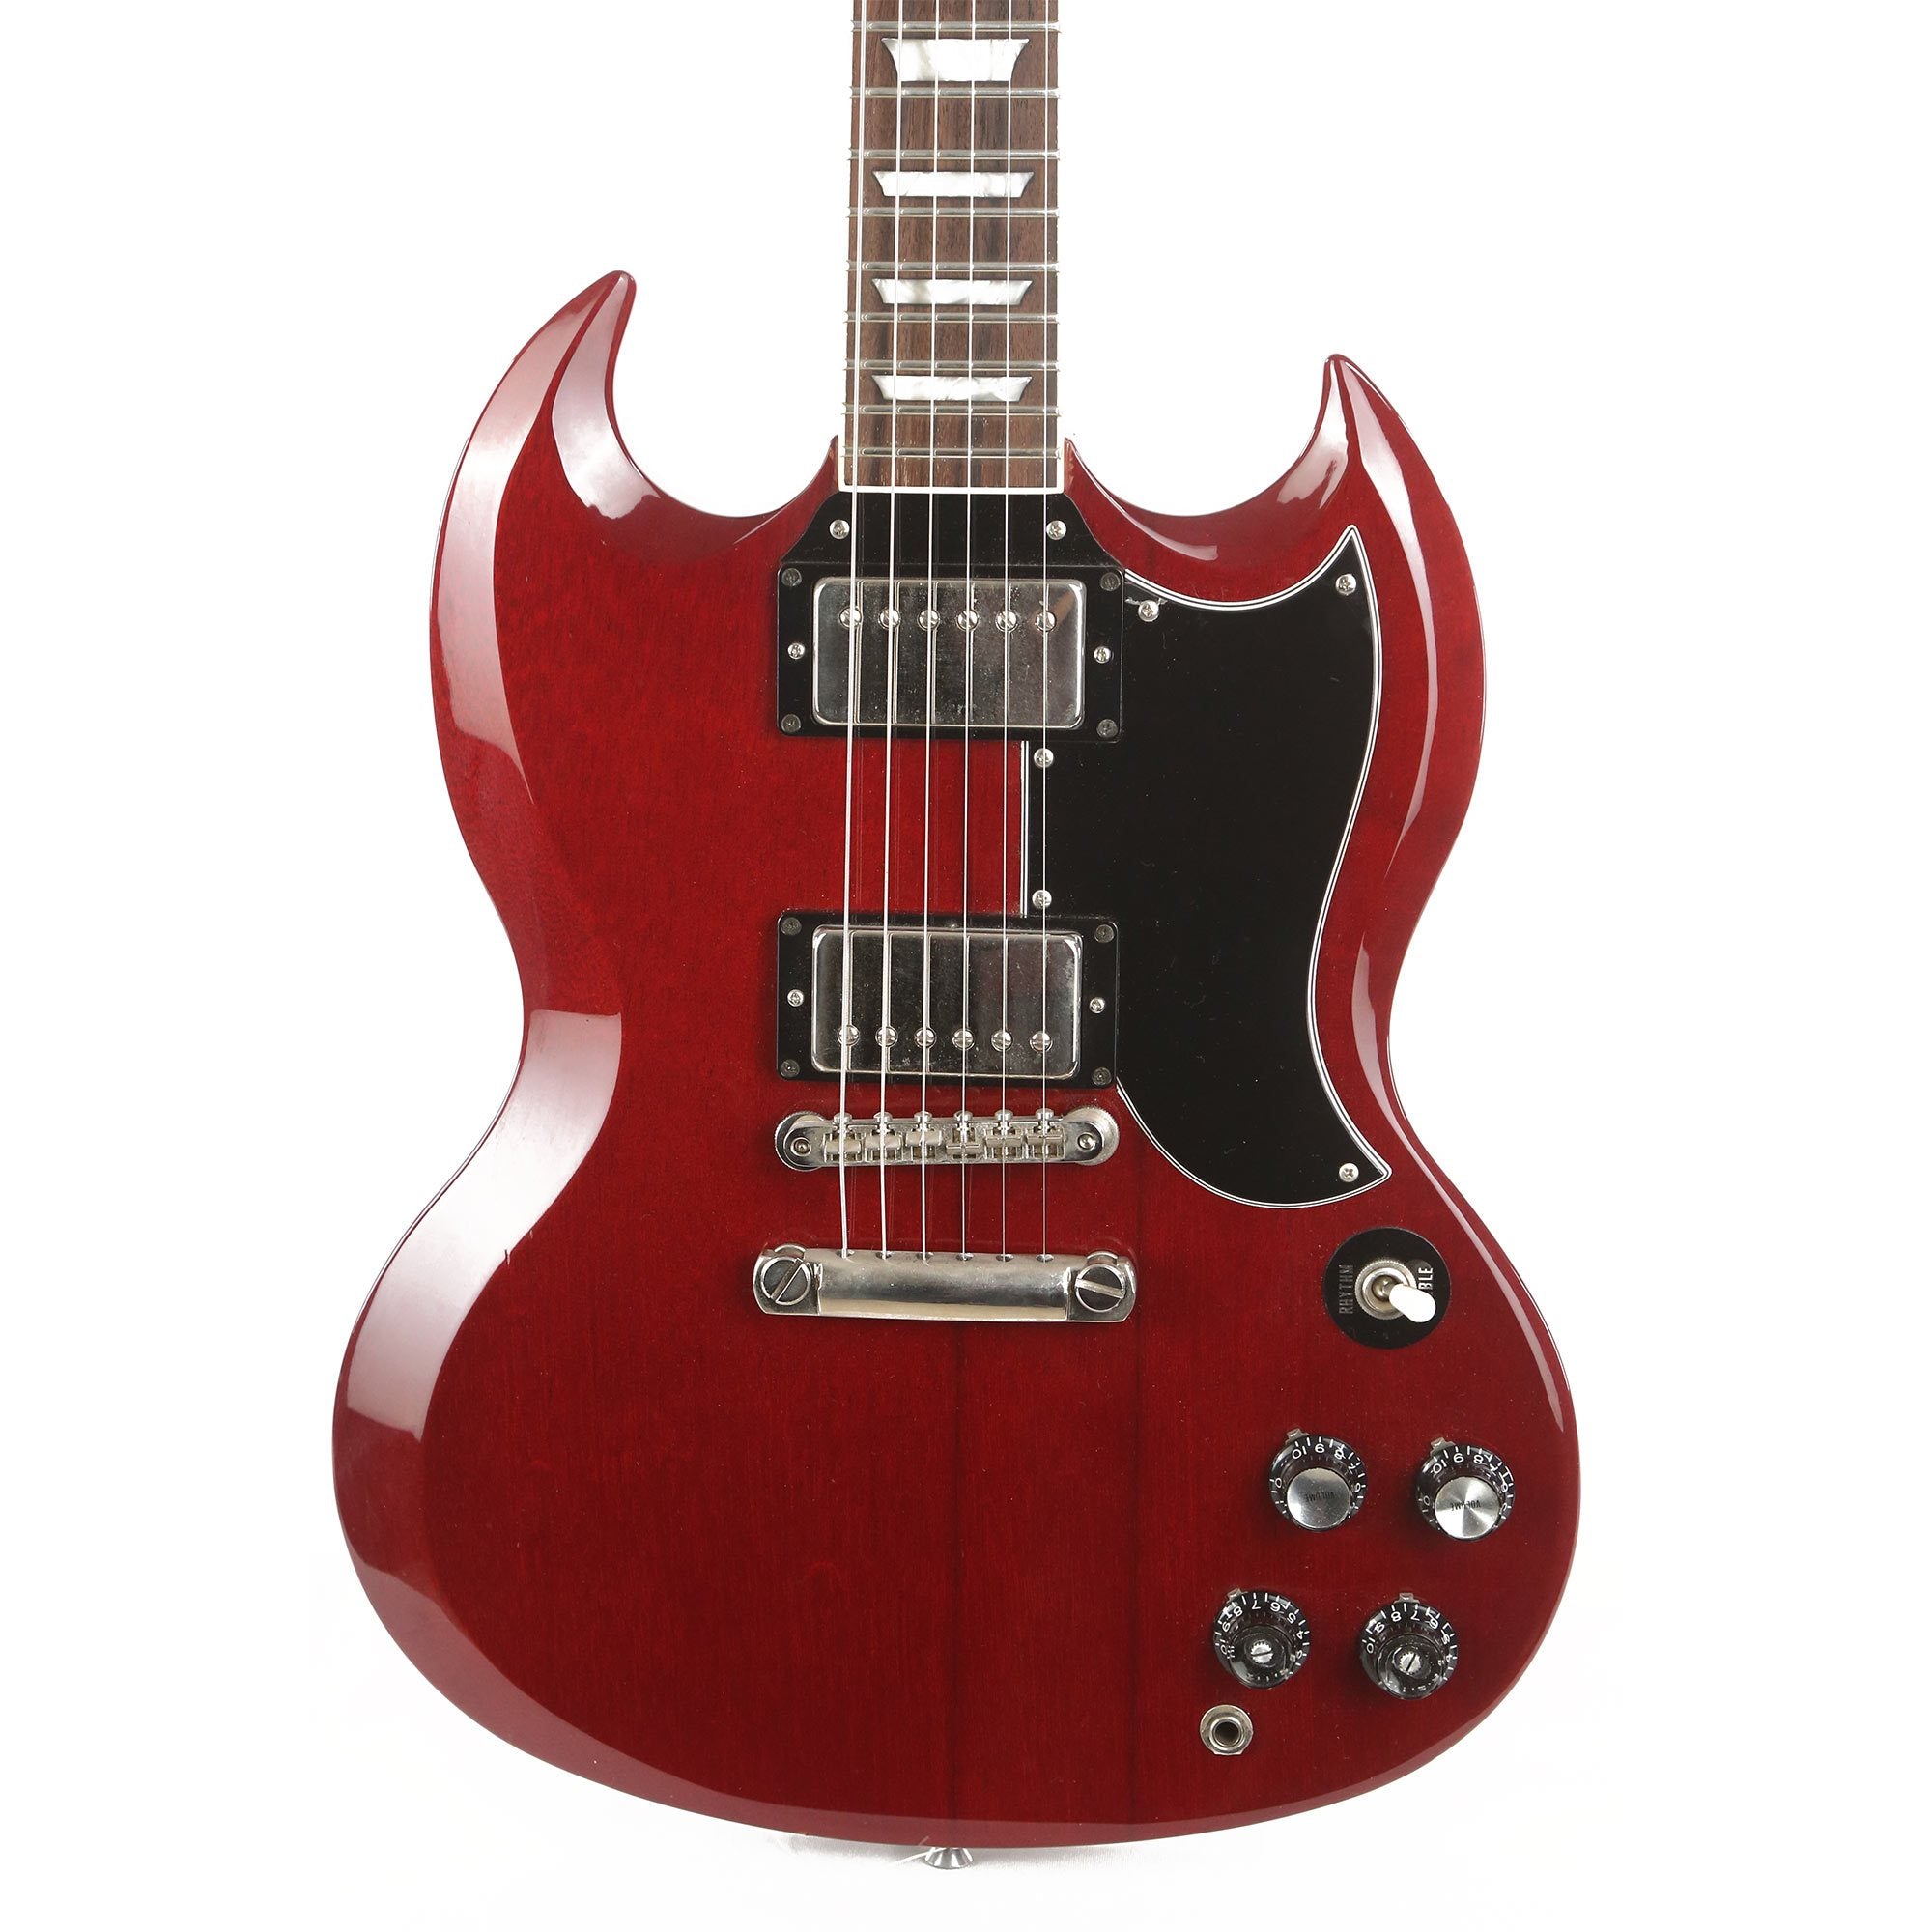 1997 Orville SG Cherry Used | The Music Zoo